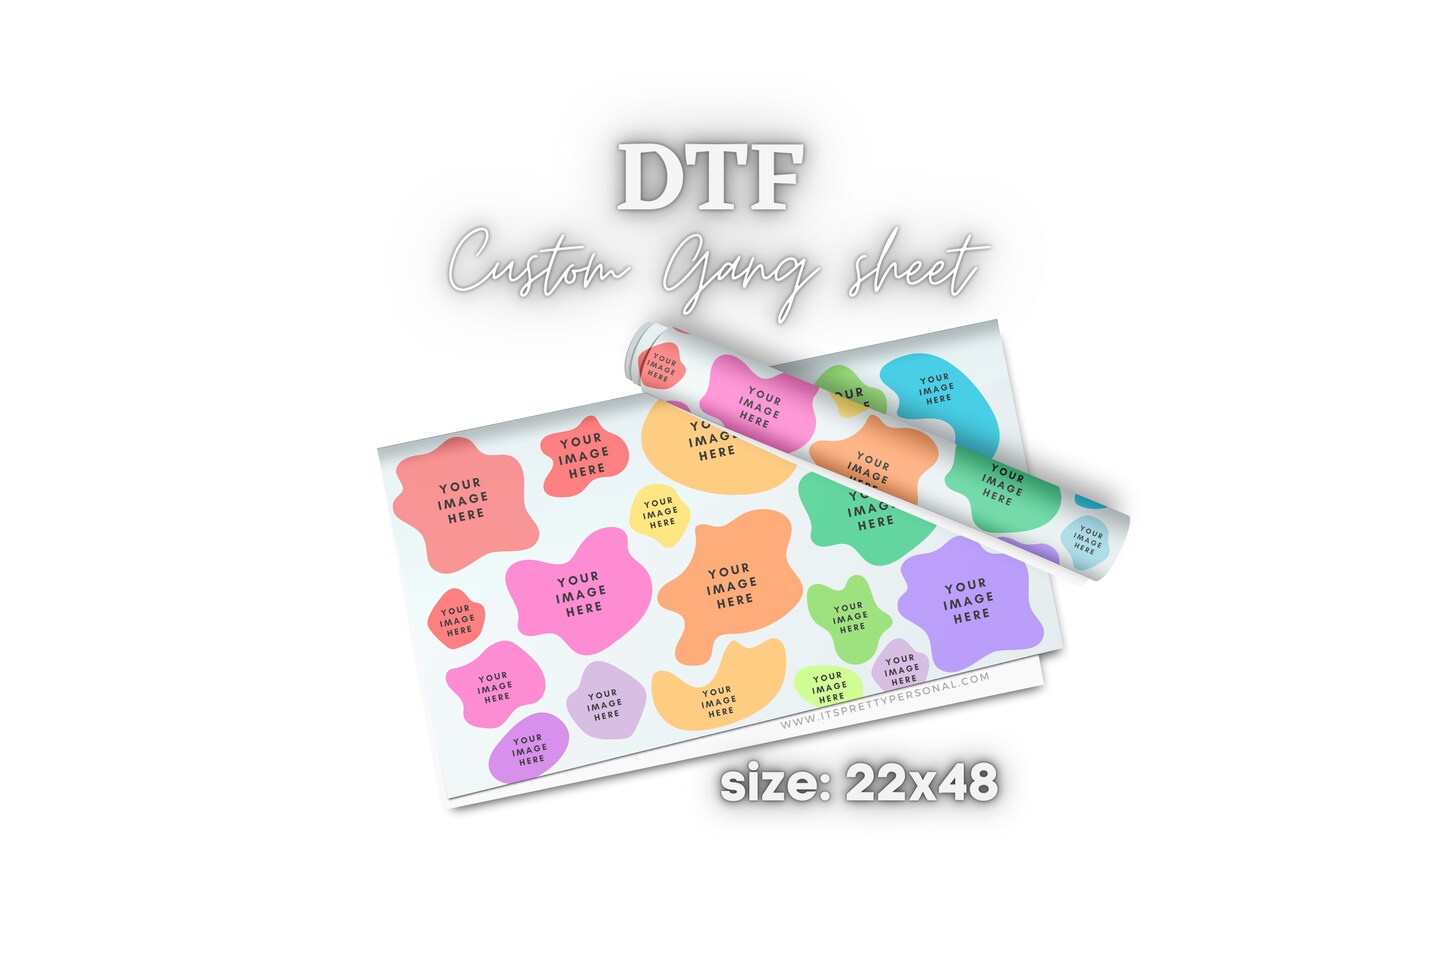 Custom UV DTF Gang Sheet- (White Backed Permanent Decals!) Design Your Own!